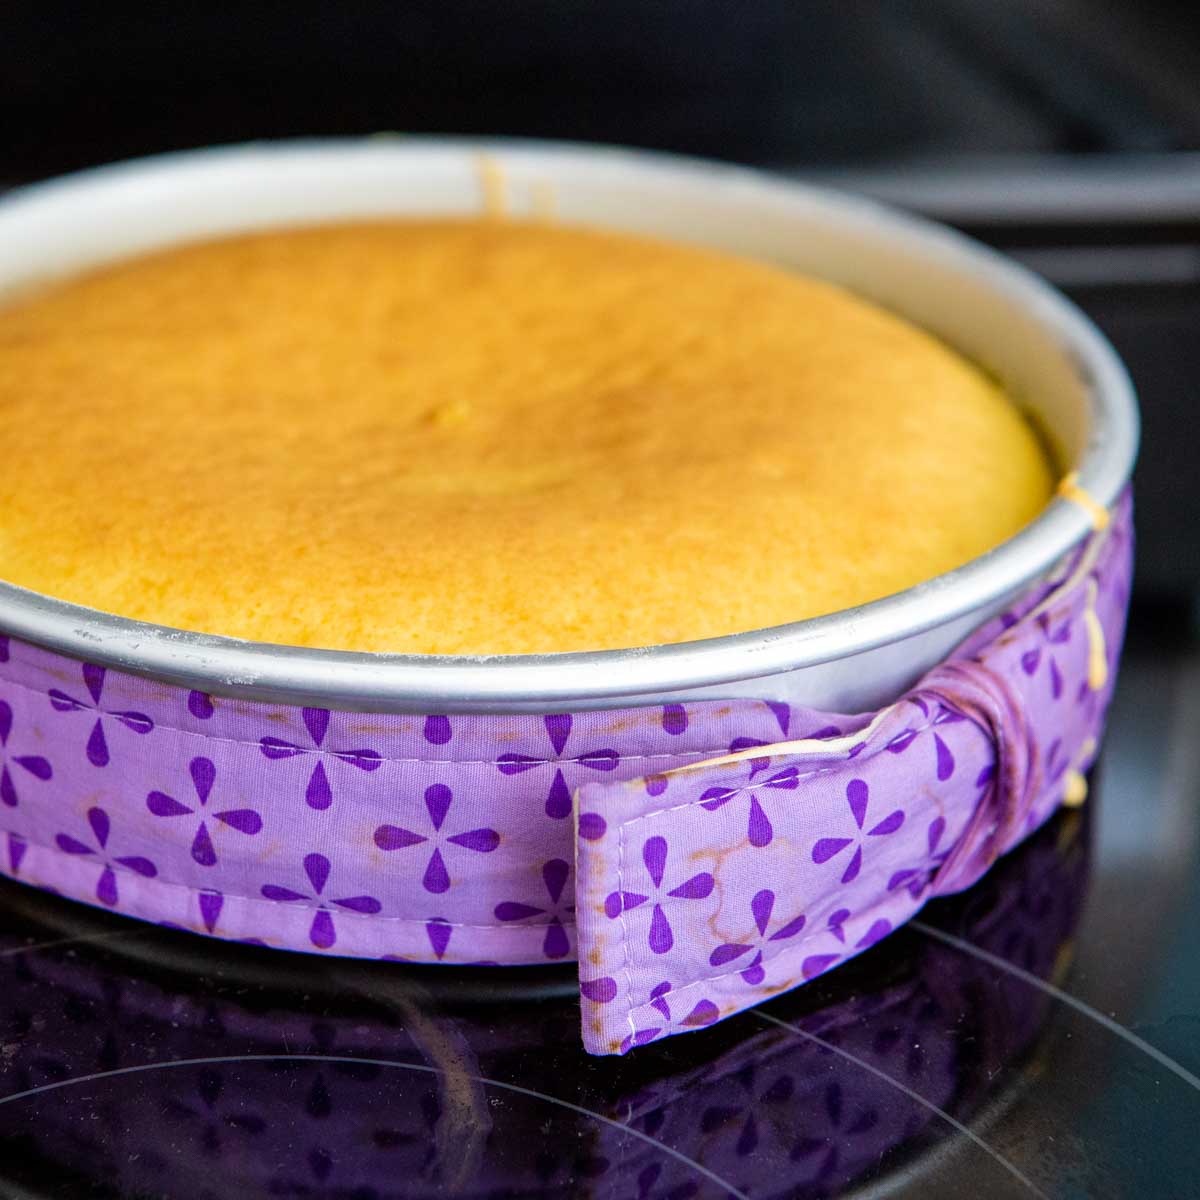 A cake pan is wrapped in a purple fabric cake strip and has a perfect level cake layer baked inside.